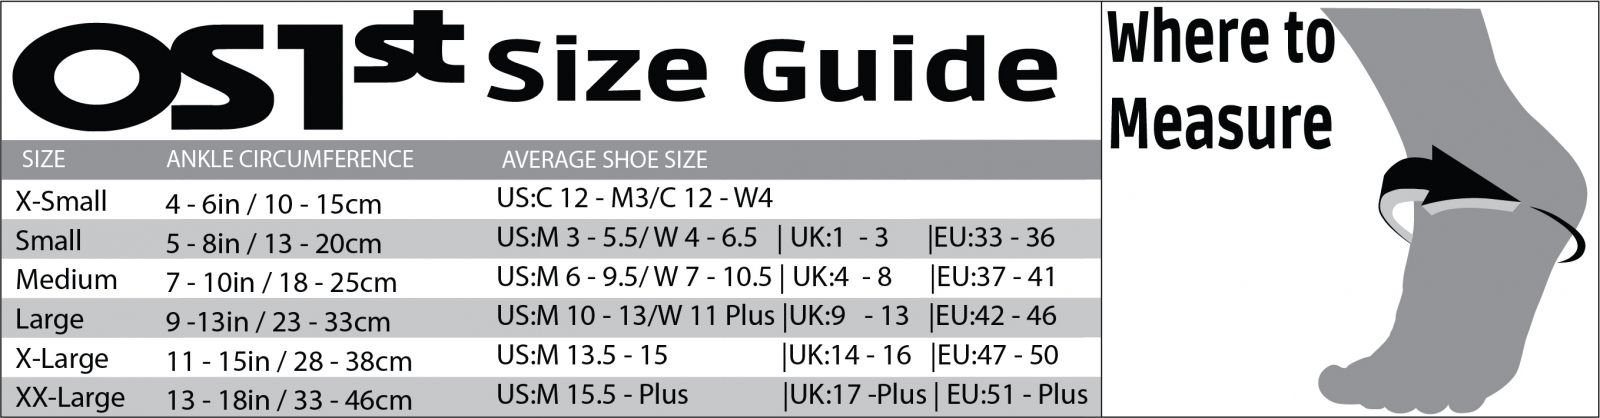 OS1st Foot Sleeve Size Guide